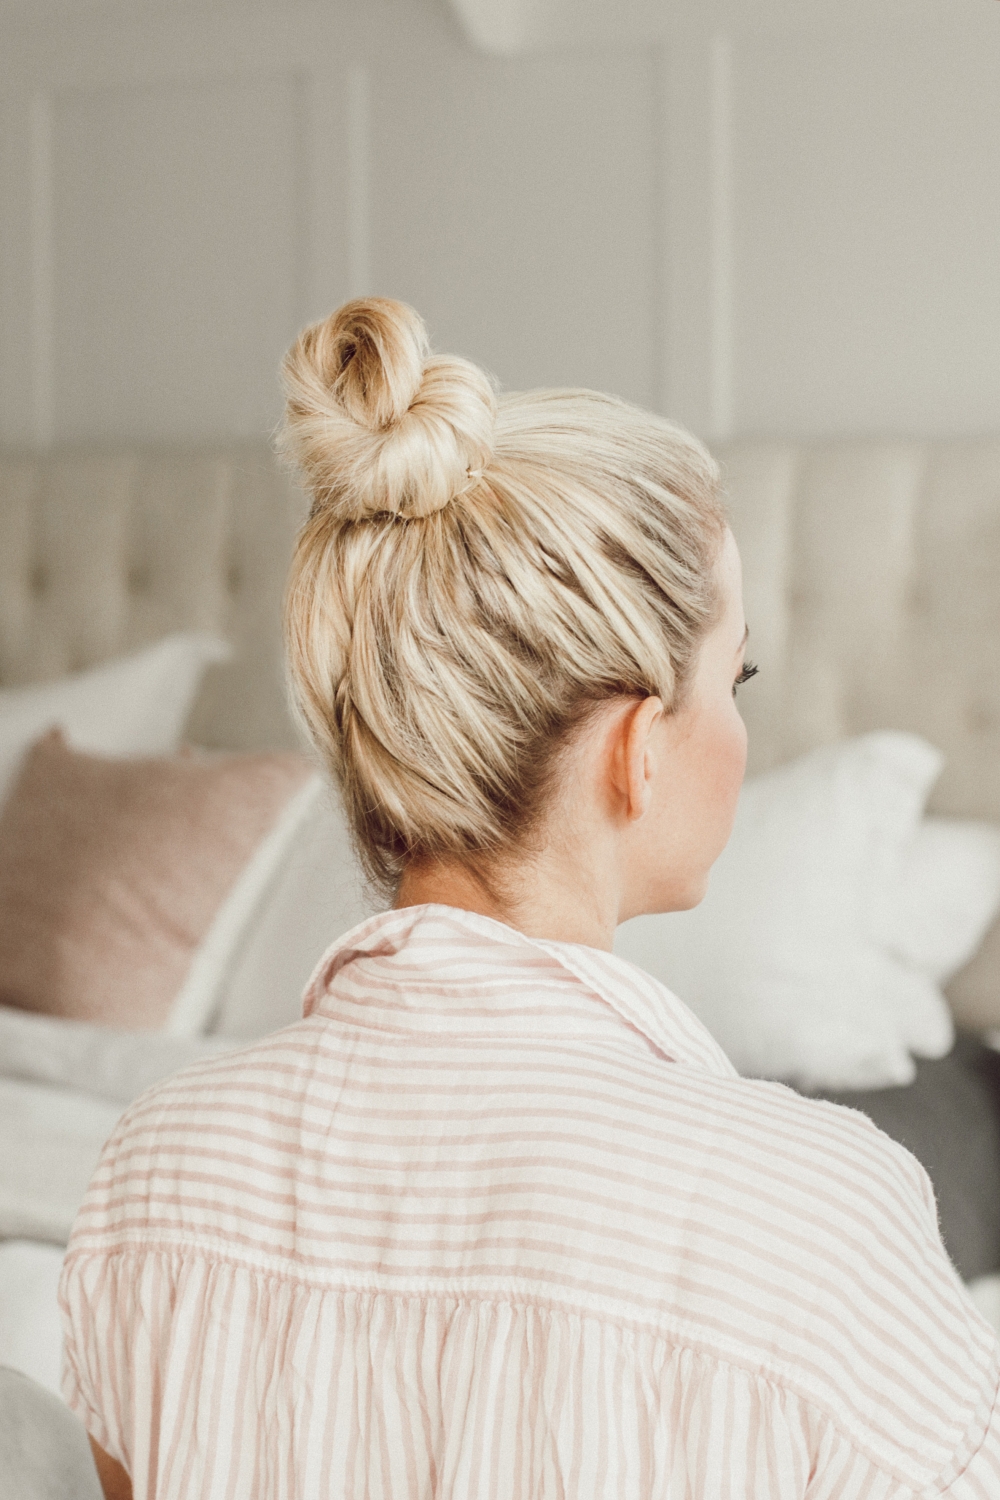 5 easy messy bun tutorials from Abby from twistmepretty.com